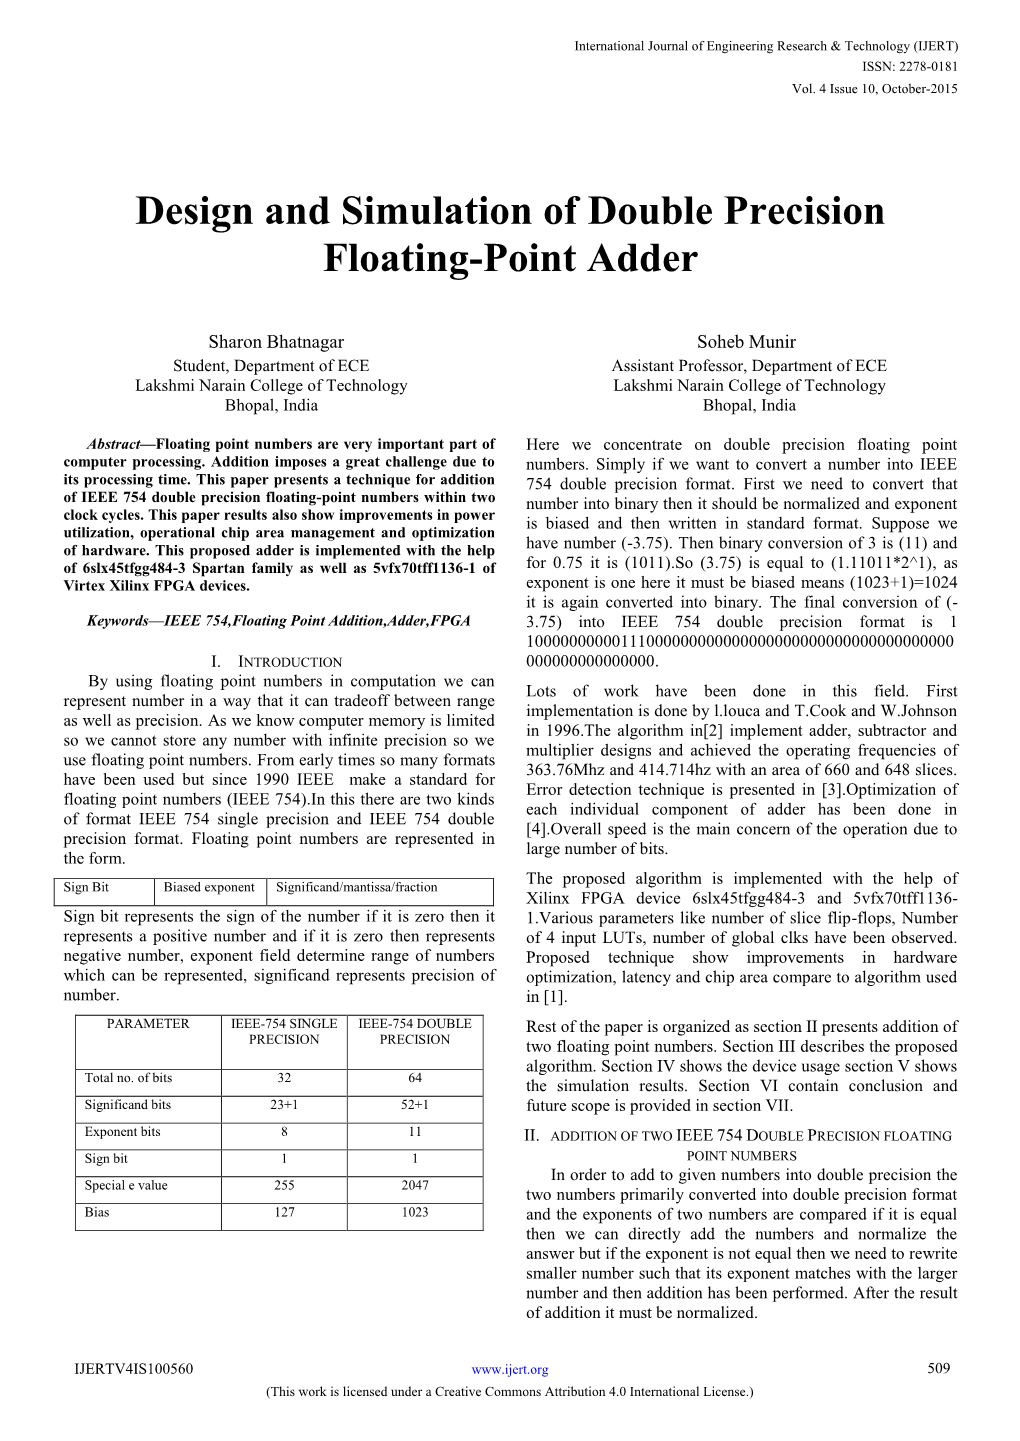 Design and Simulation of Double Precision Floating-Point Adder